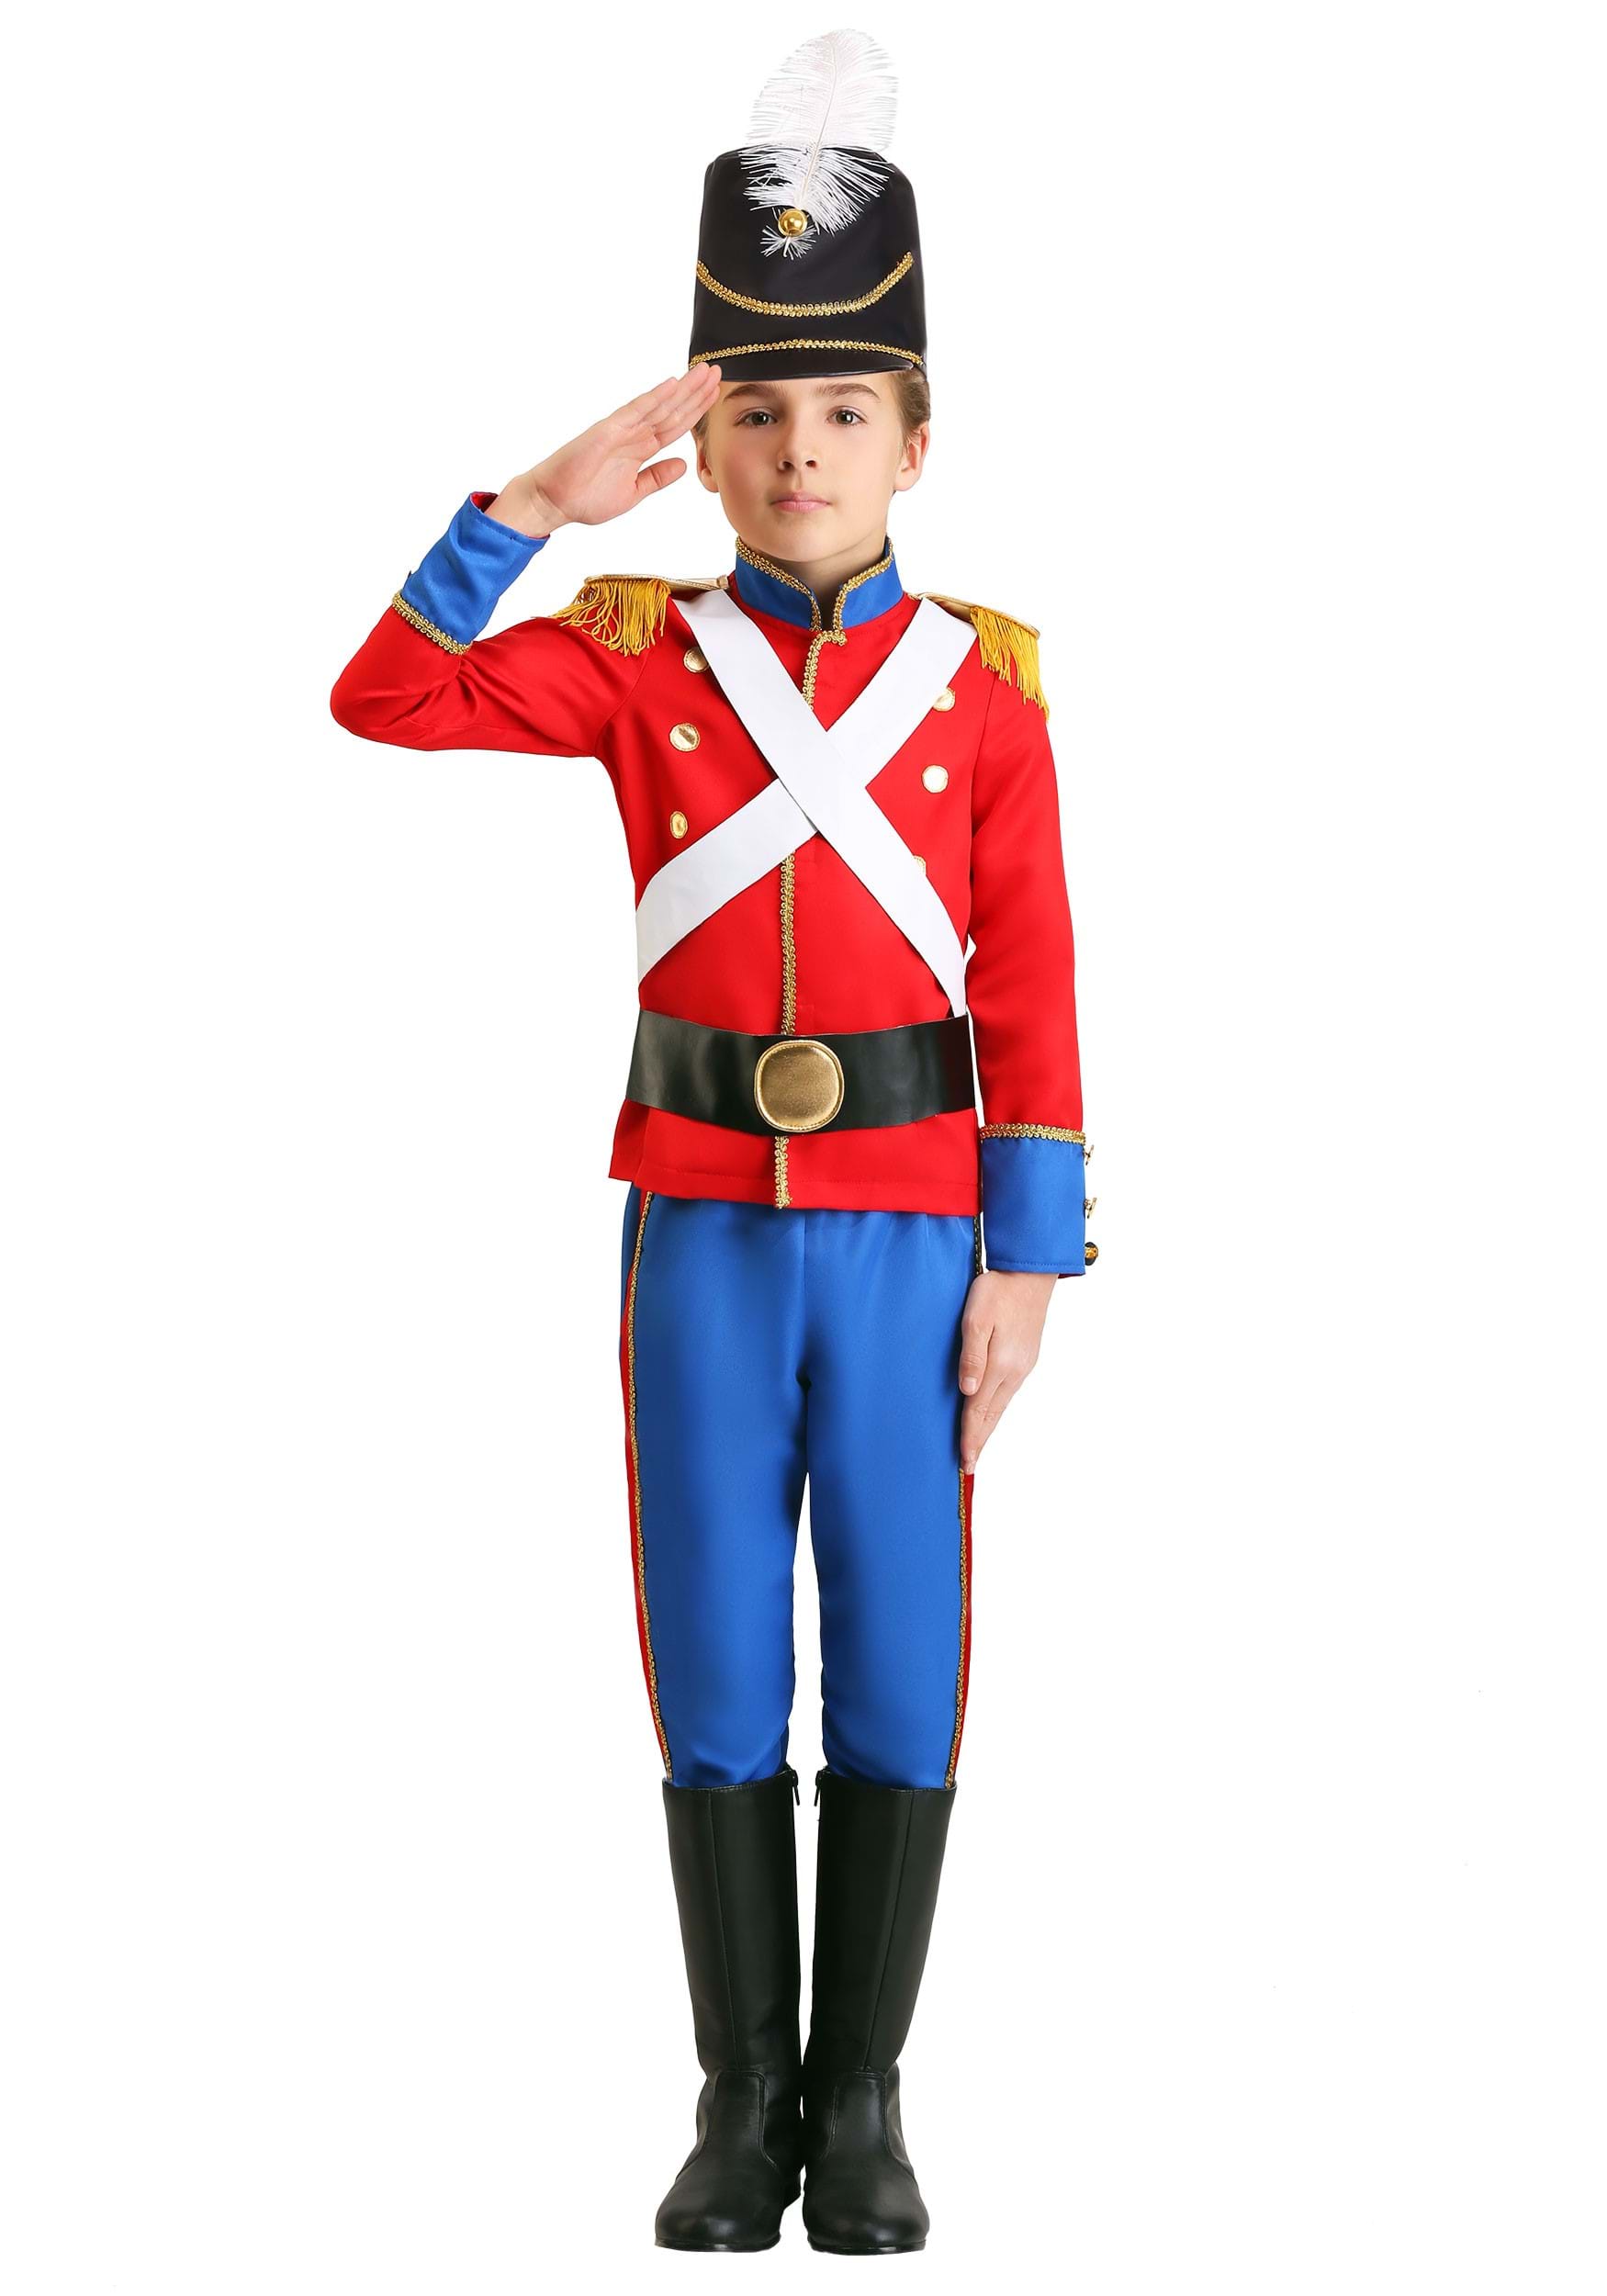 Photos - Fancy Dress Soldier FUN Costumes Boy's Toy  Costume |  Costumes for Boys Black&# 